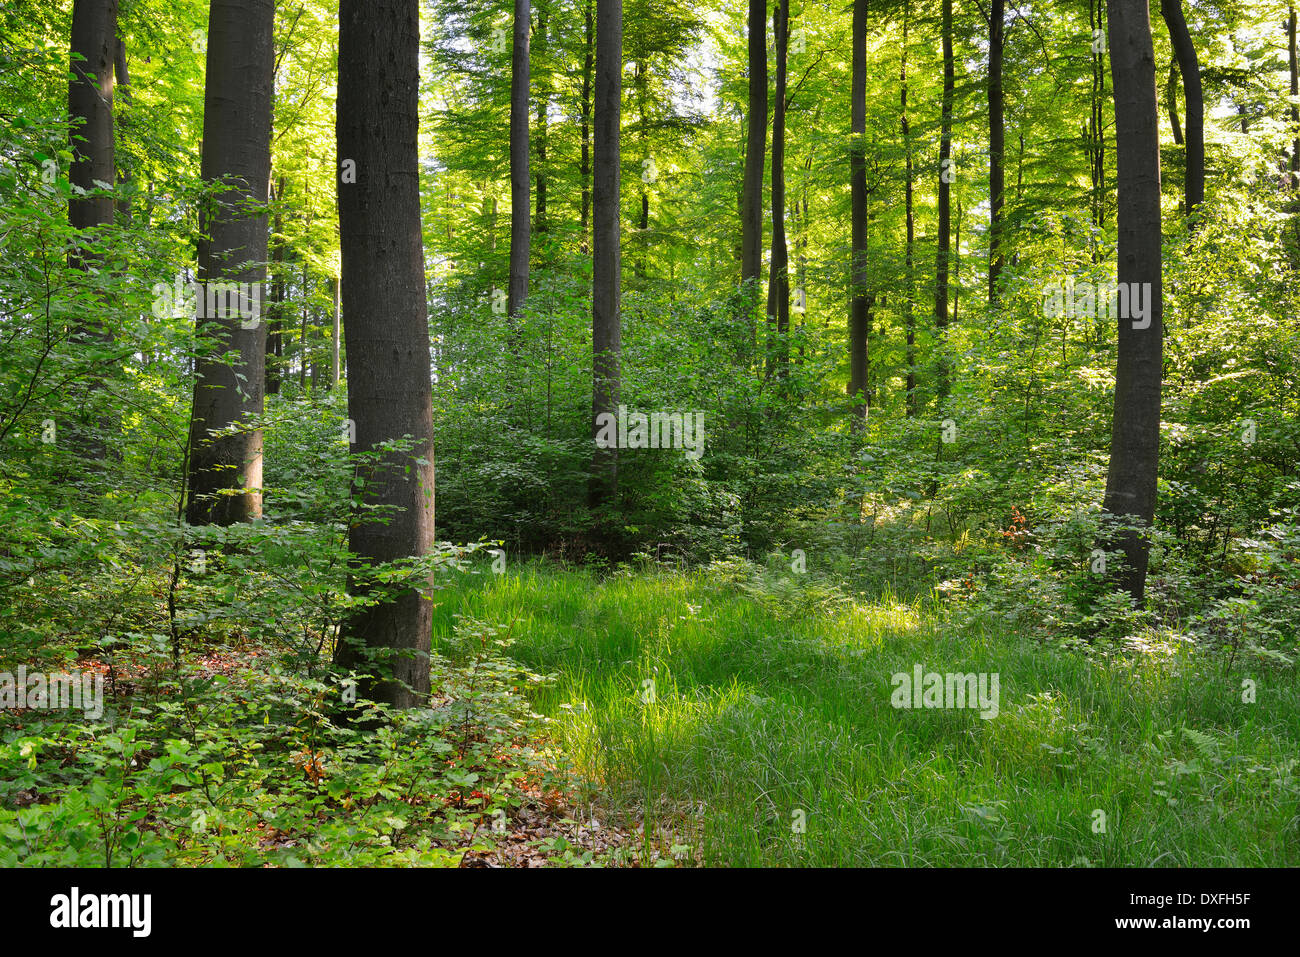 Deciduous Forest in Spring, Kefenrod, Hesse, Germany Stock Photo